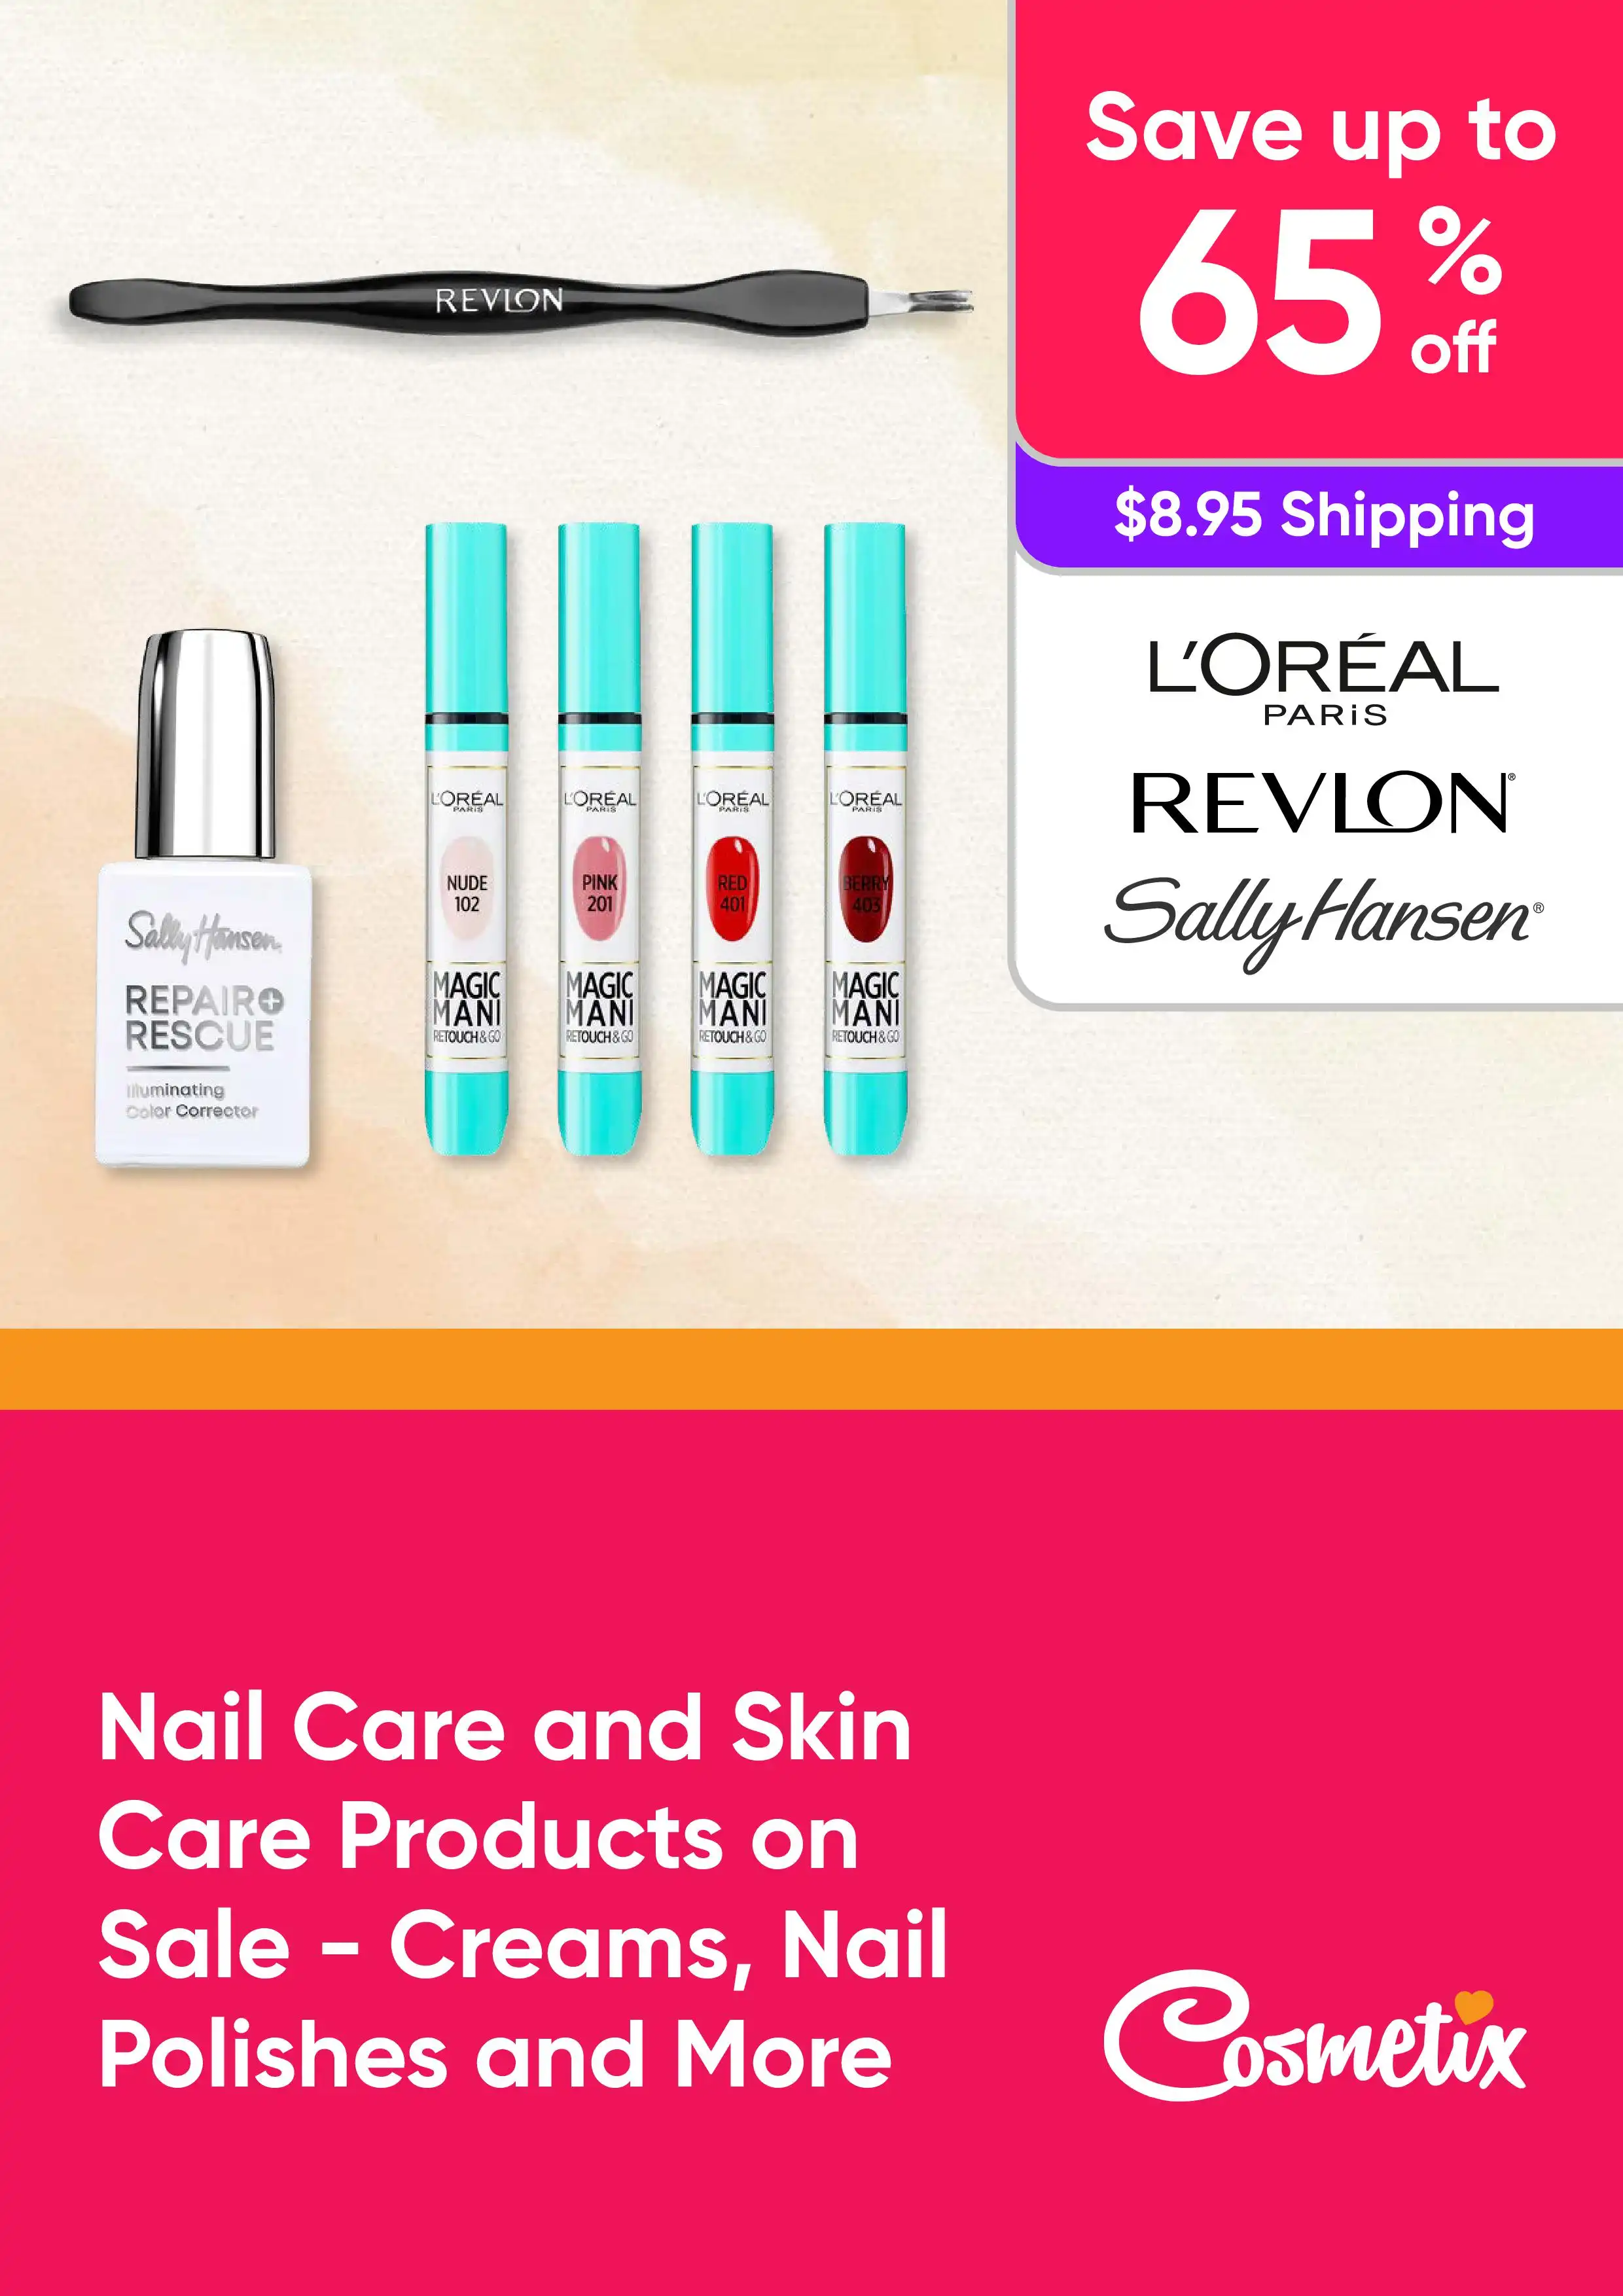 Nail Care and Skin Care Products on Sale - Save up to 65% Off Creams, Nail Polishes and More